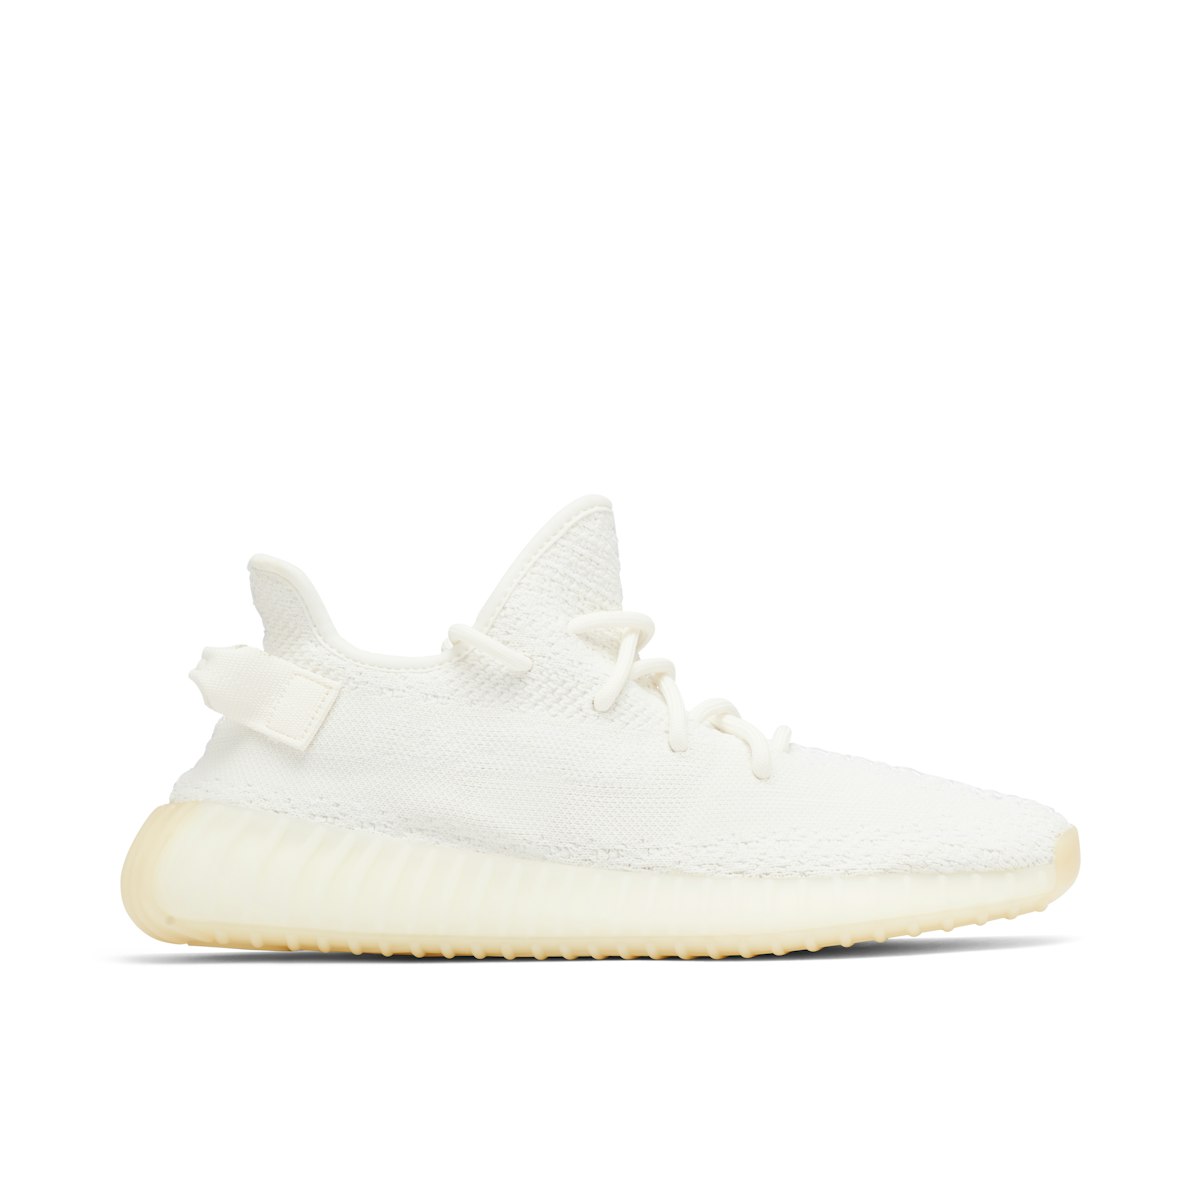 https://www.laced.com/products/yeezy-boost-350-v2-cream-triple-white